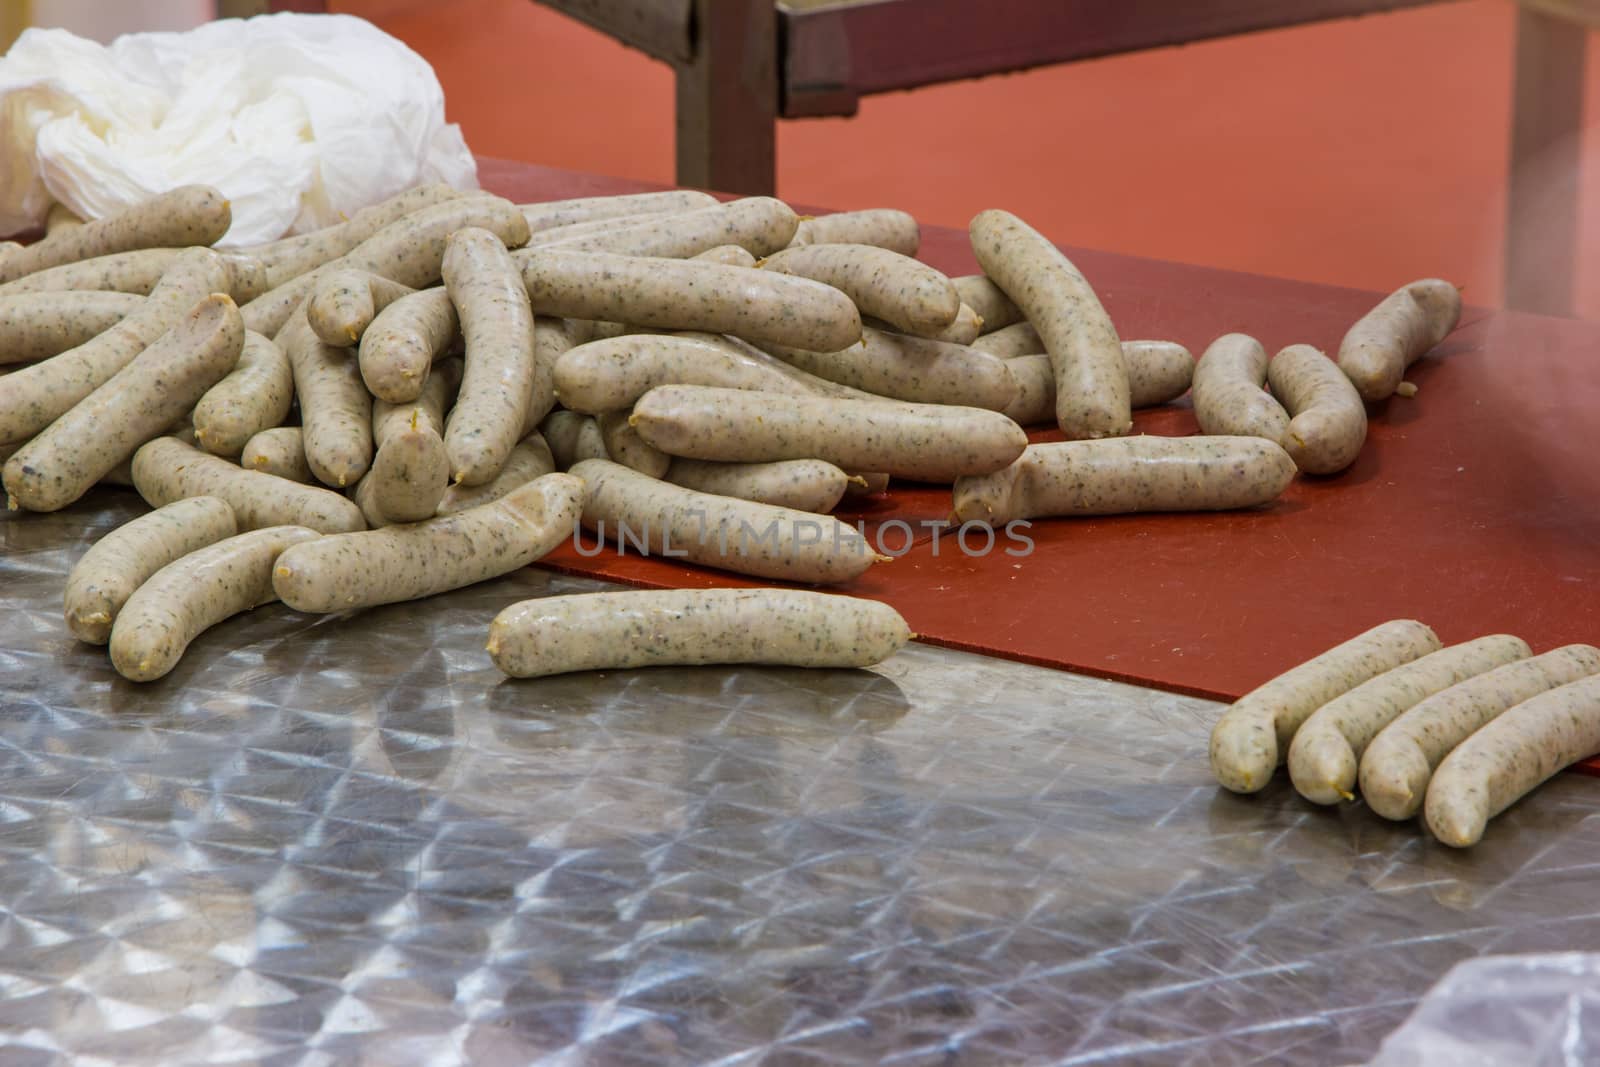 Meat sausages being made in a factory